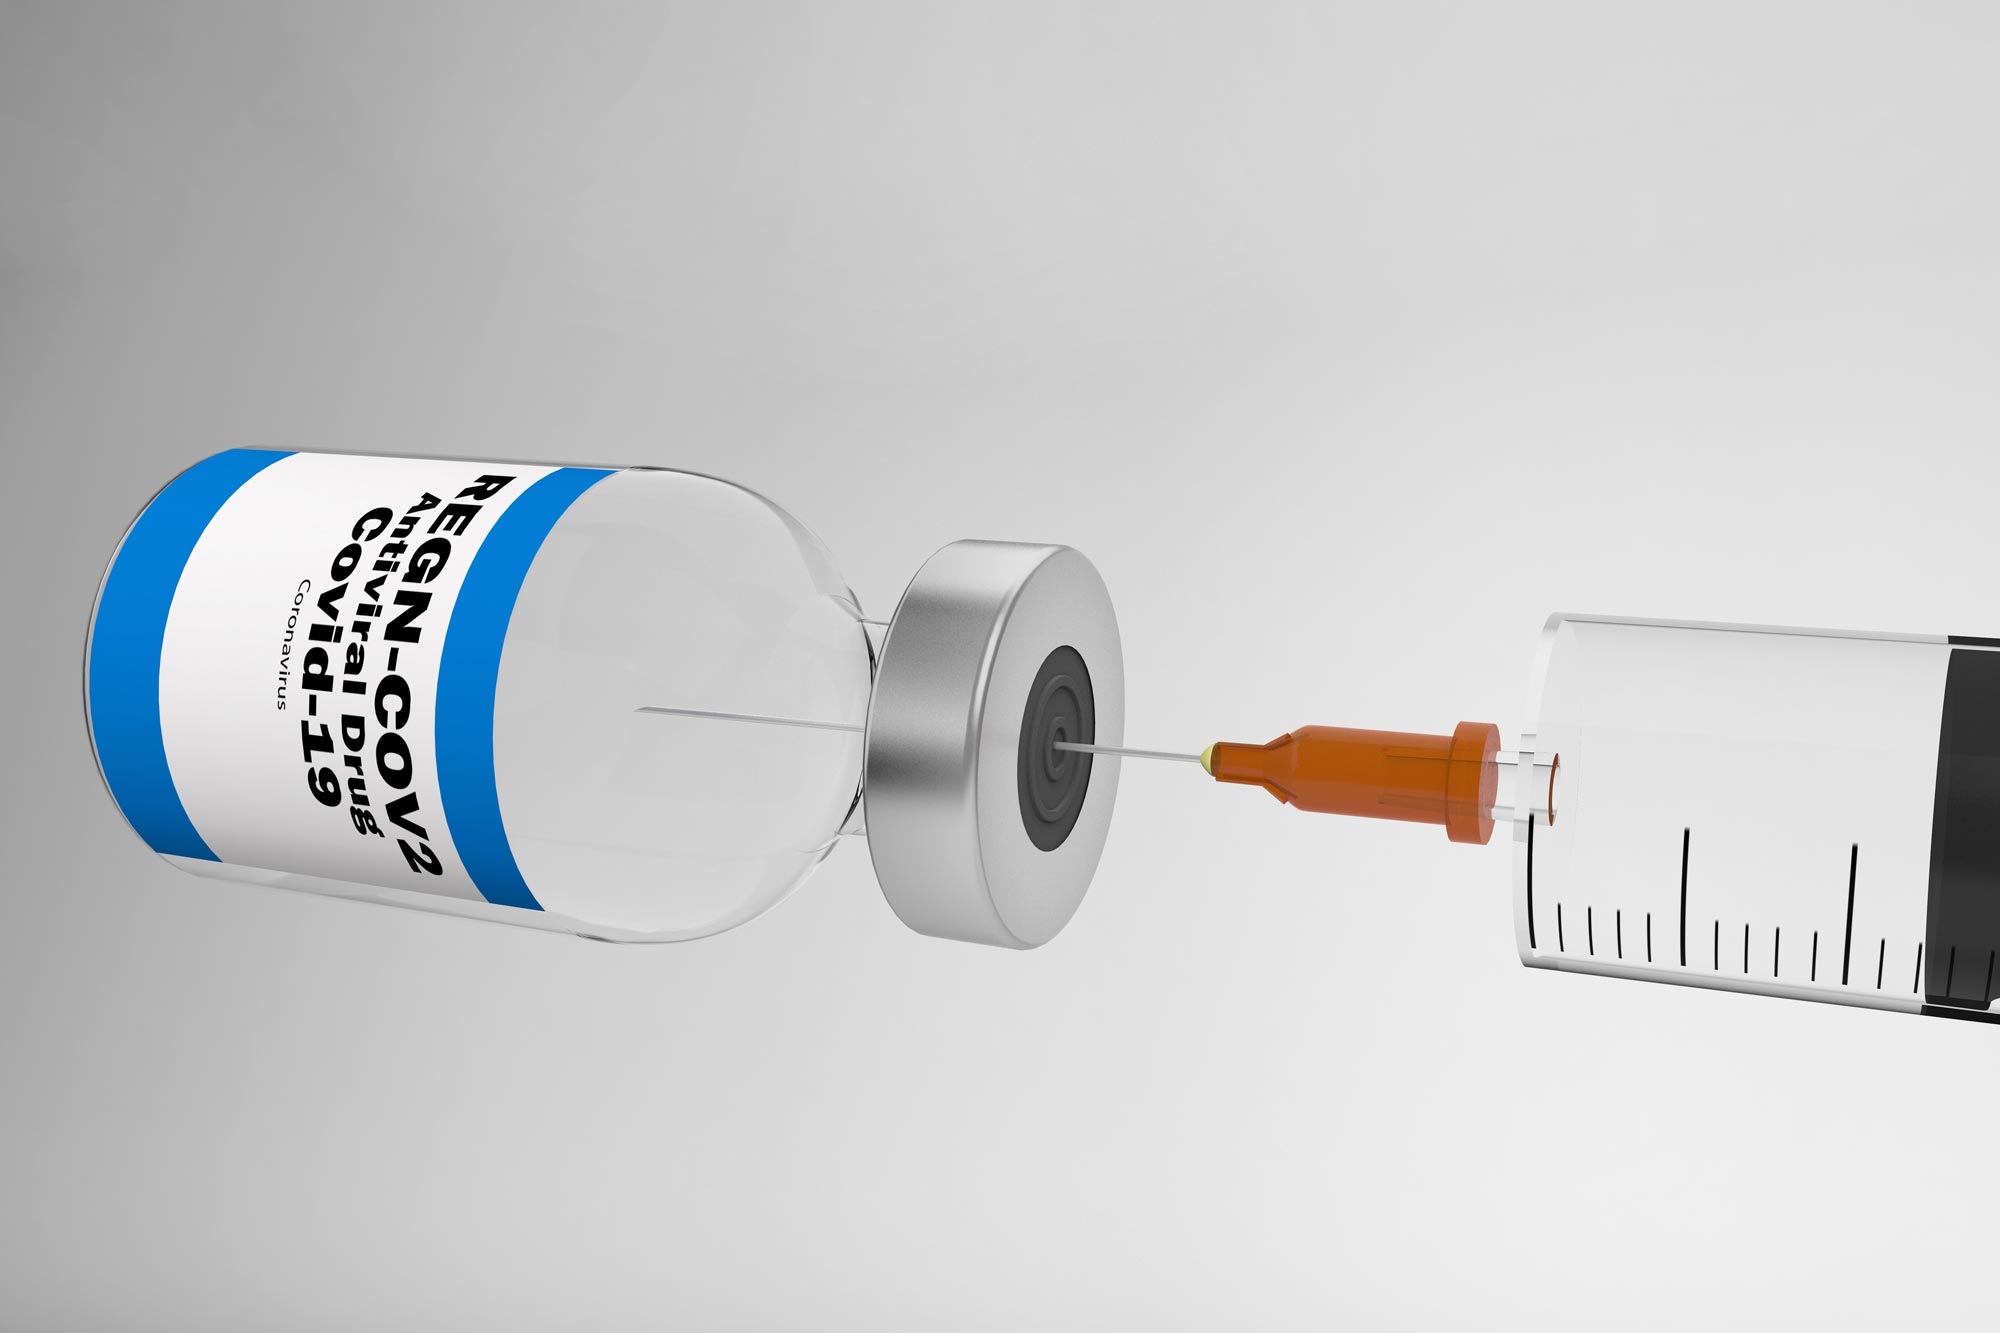 Illustration of a syringe drawing up a covid-19 vaccine